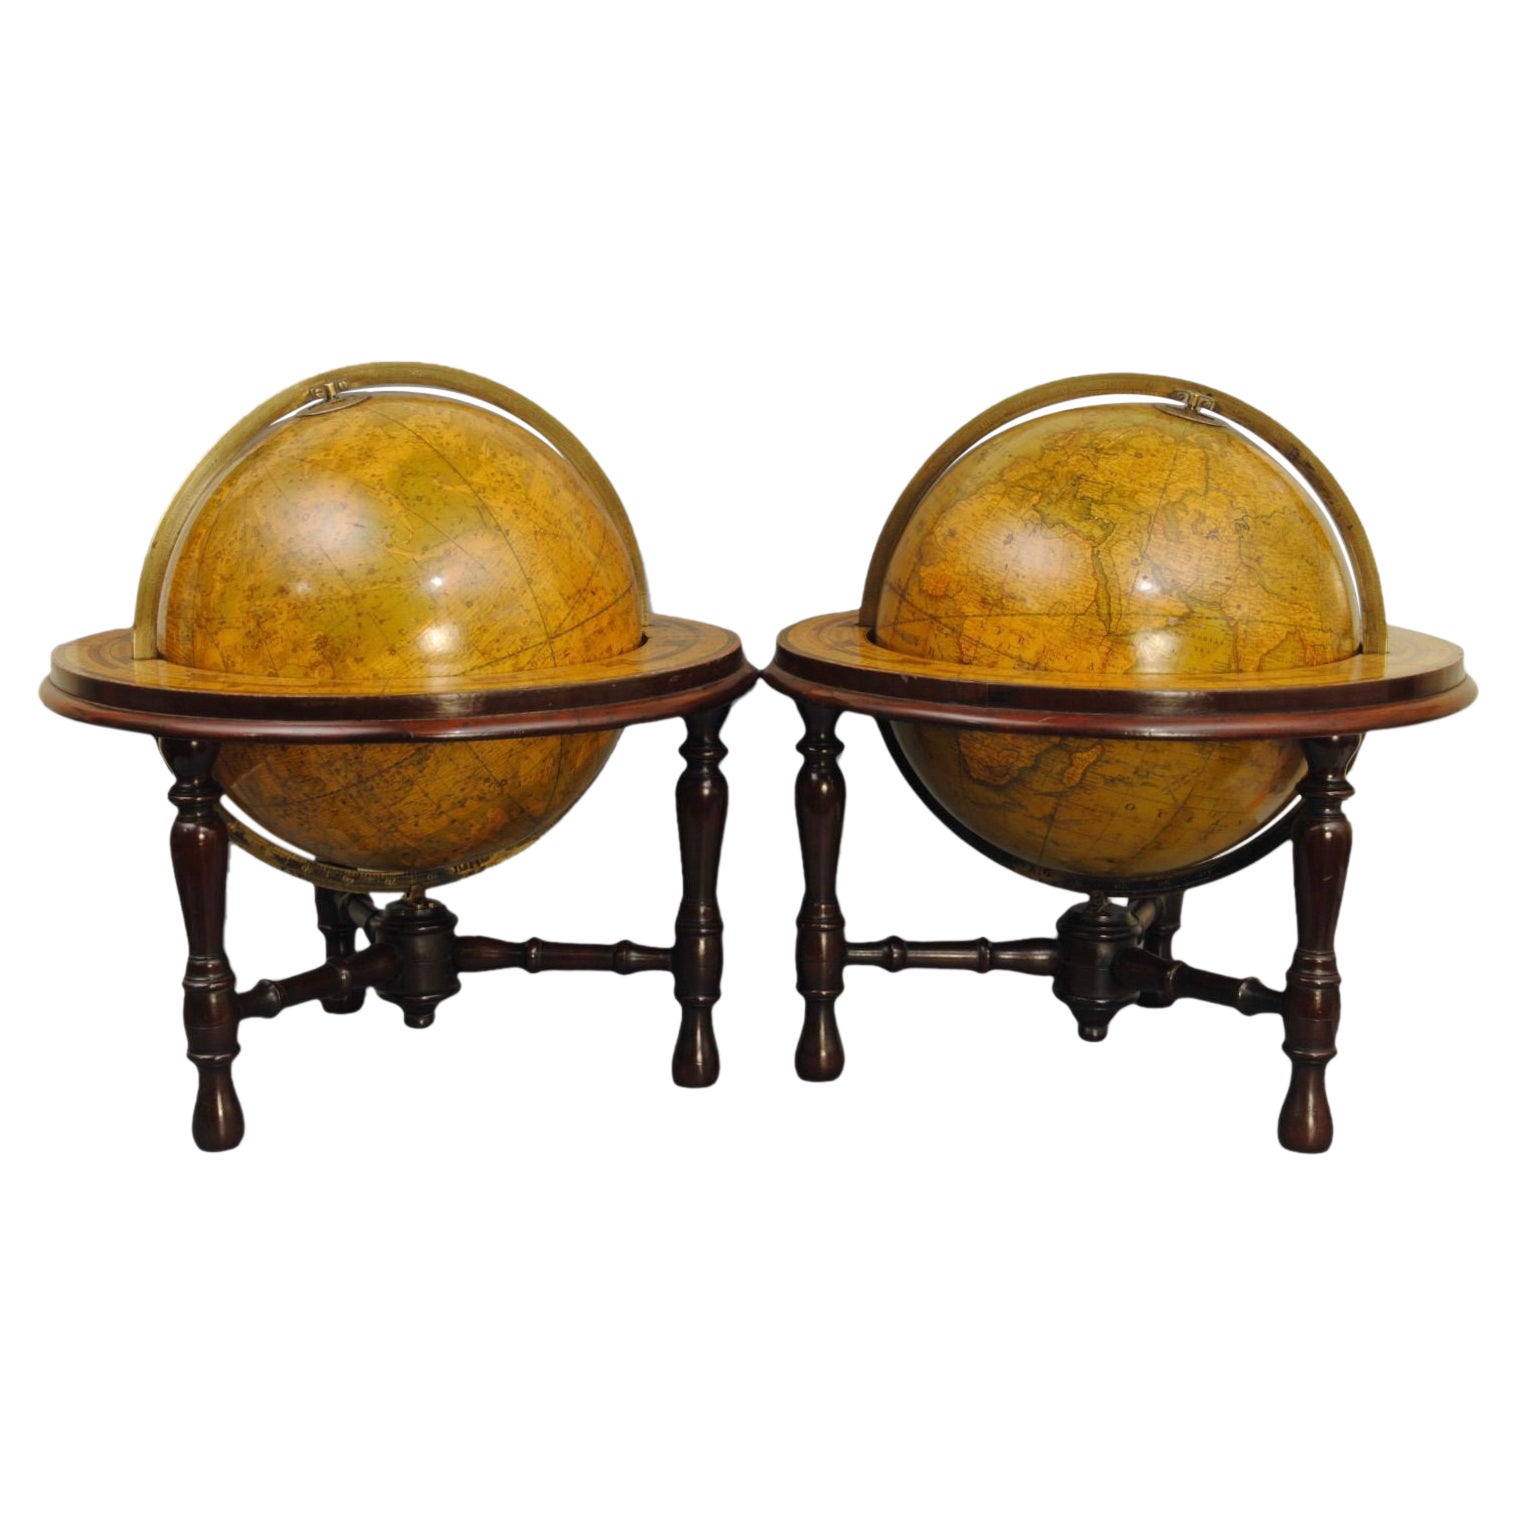 Pair of 19th Century Table Globes by Crunchley